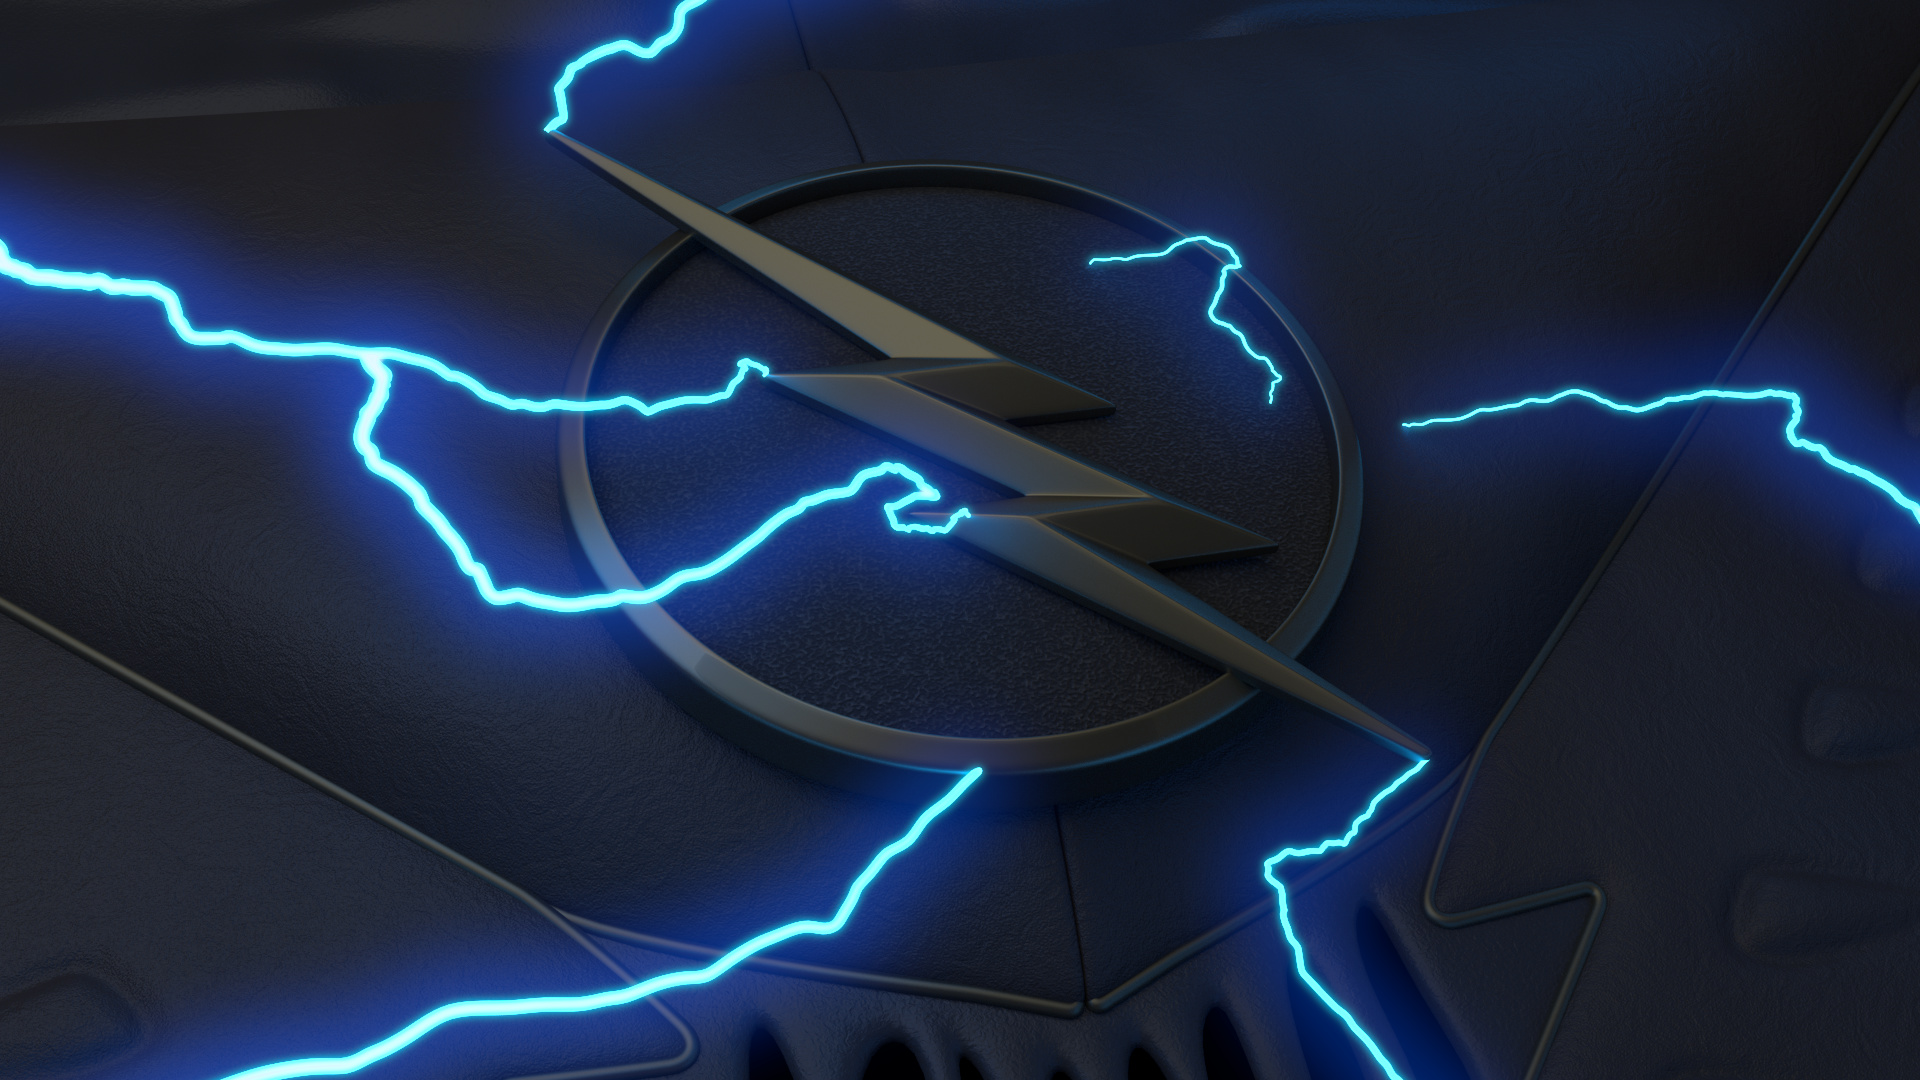 Electrified 3d Zoom Wallpaper 1080p More Sizes And Another Style In